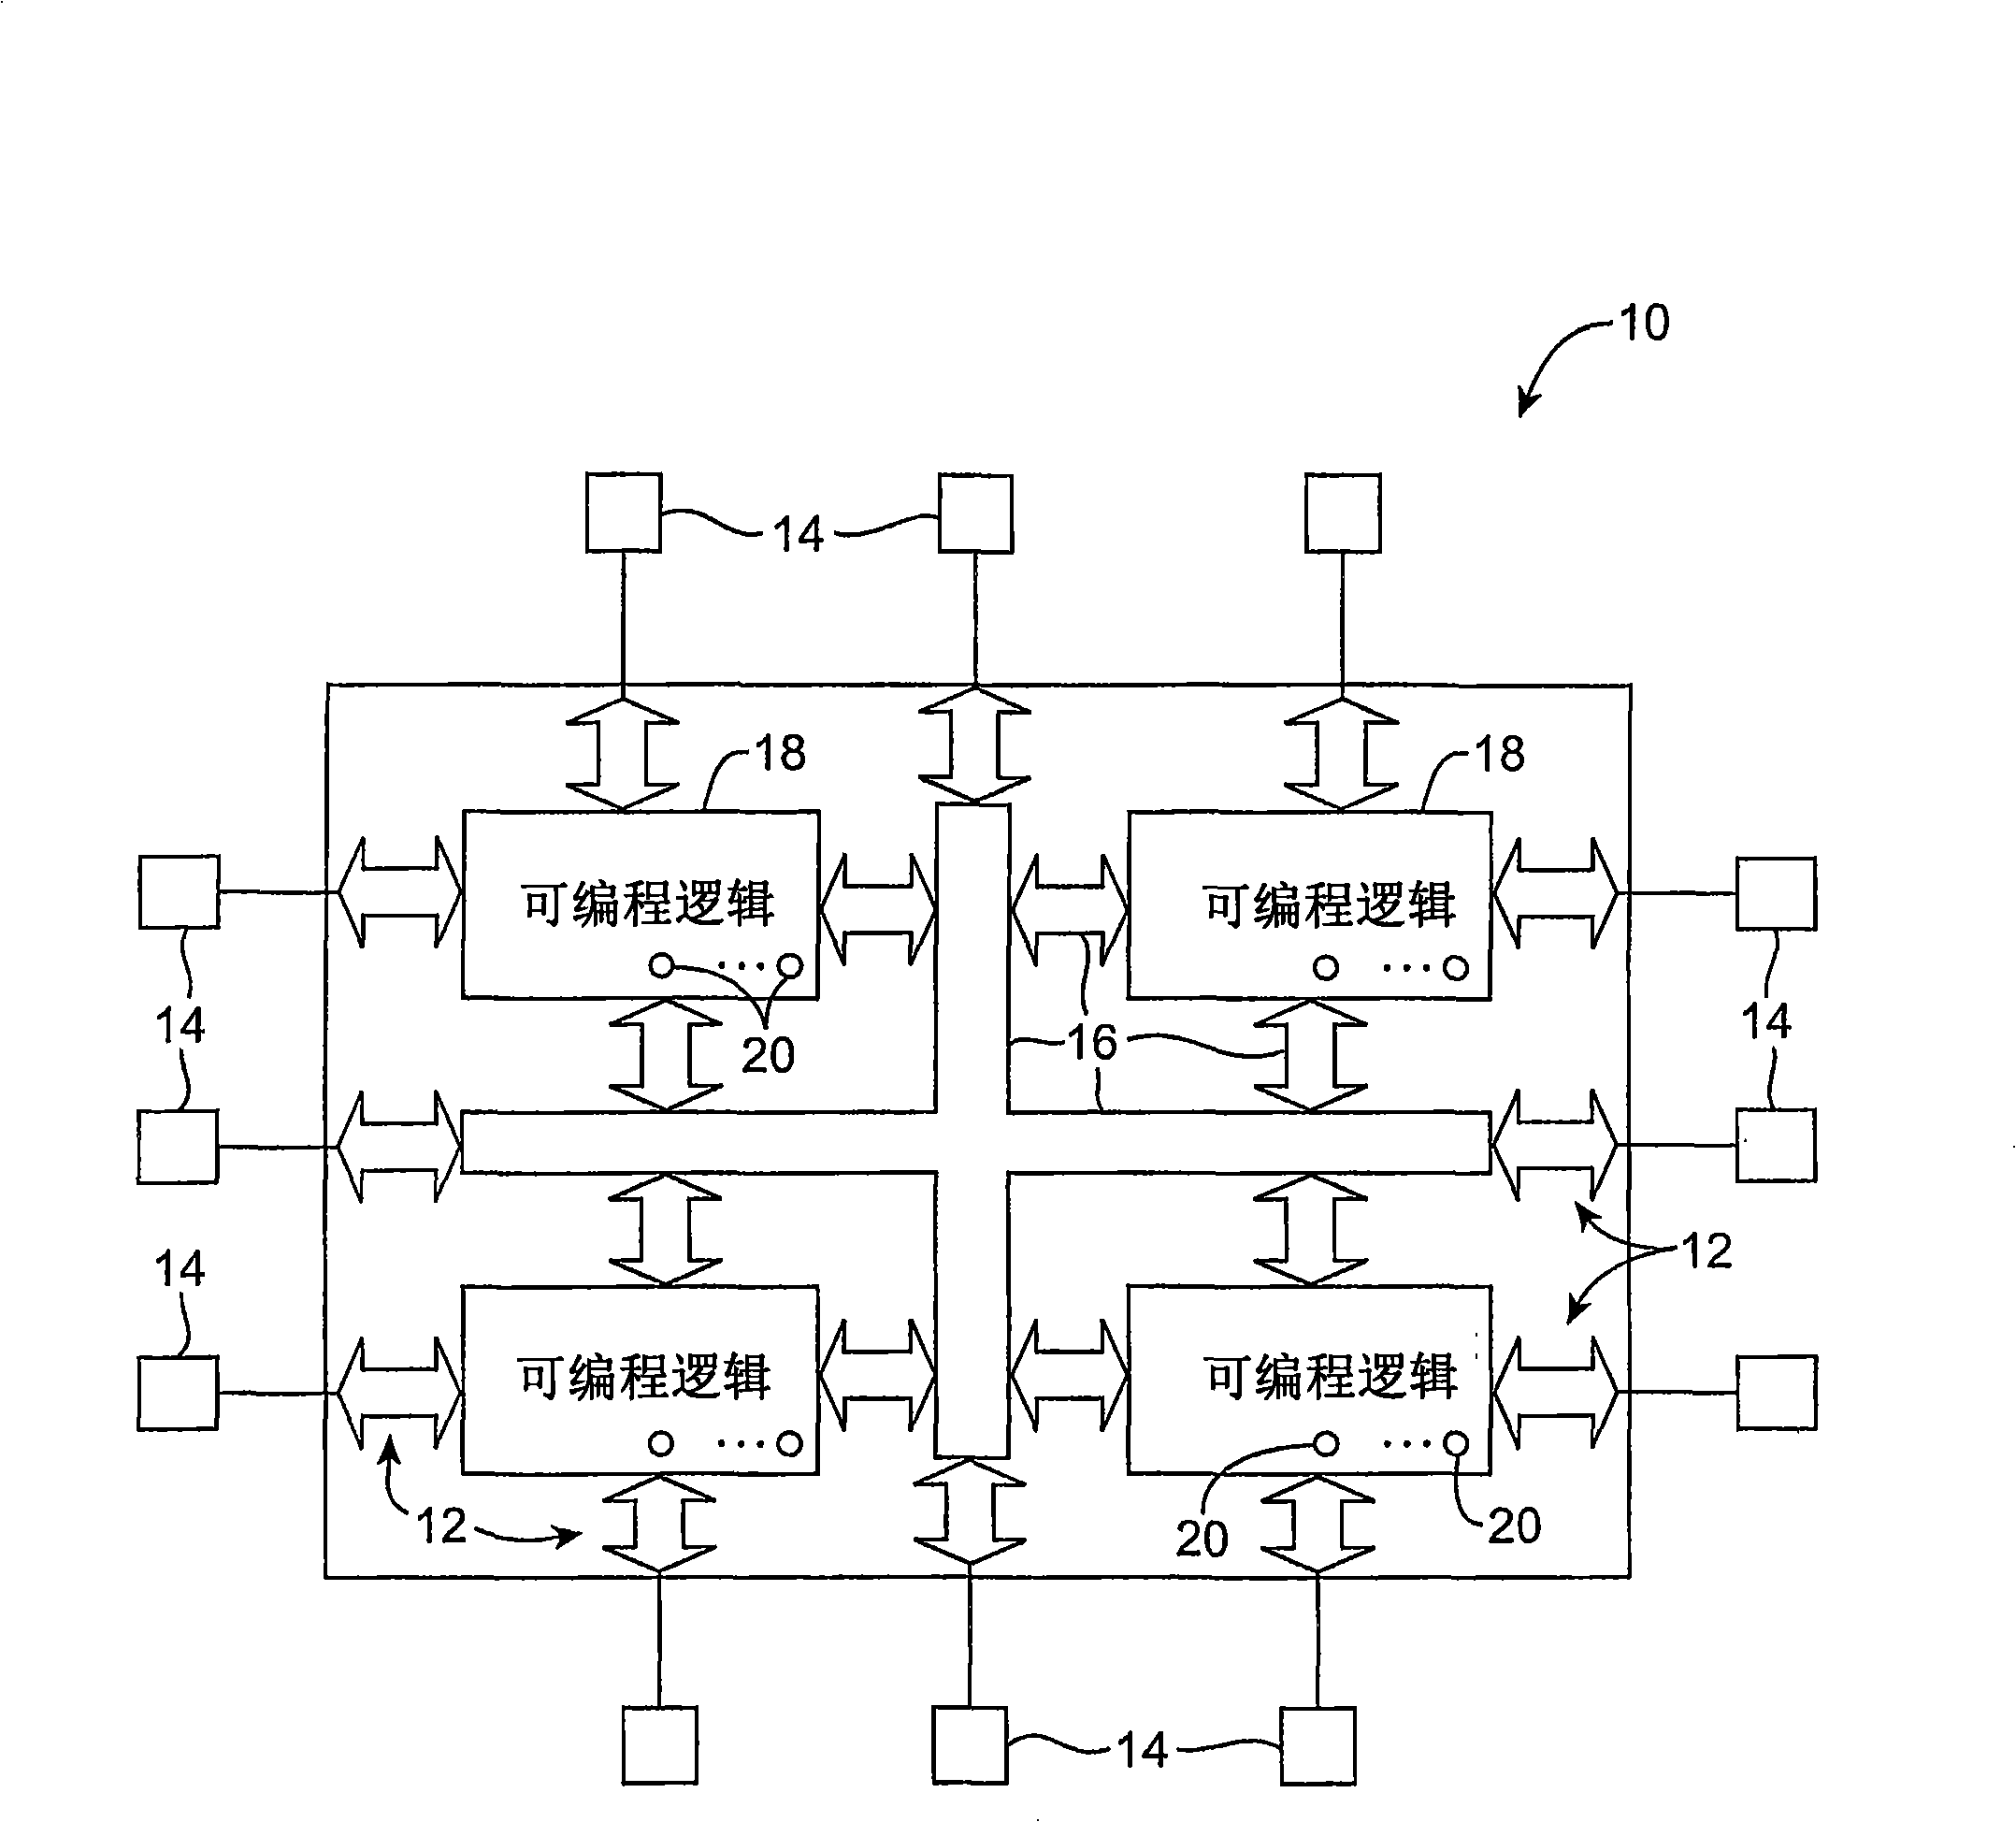 Volatile memory elements with elevated power supply levels for programmable logic device integrated circuits